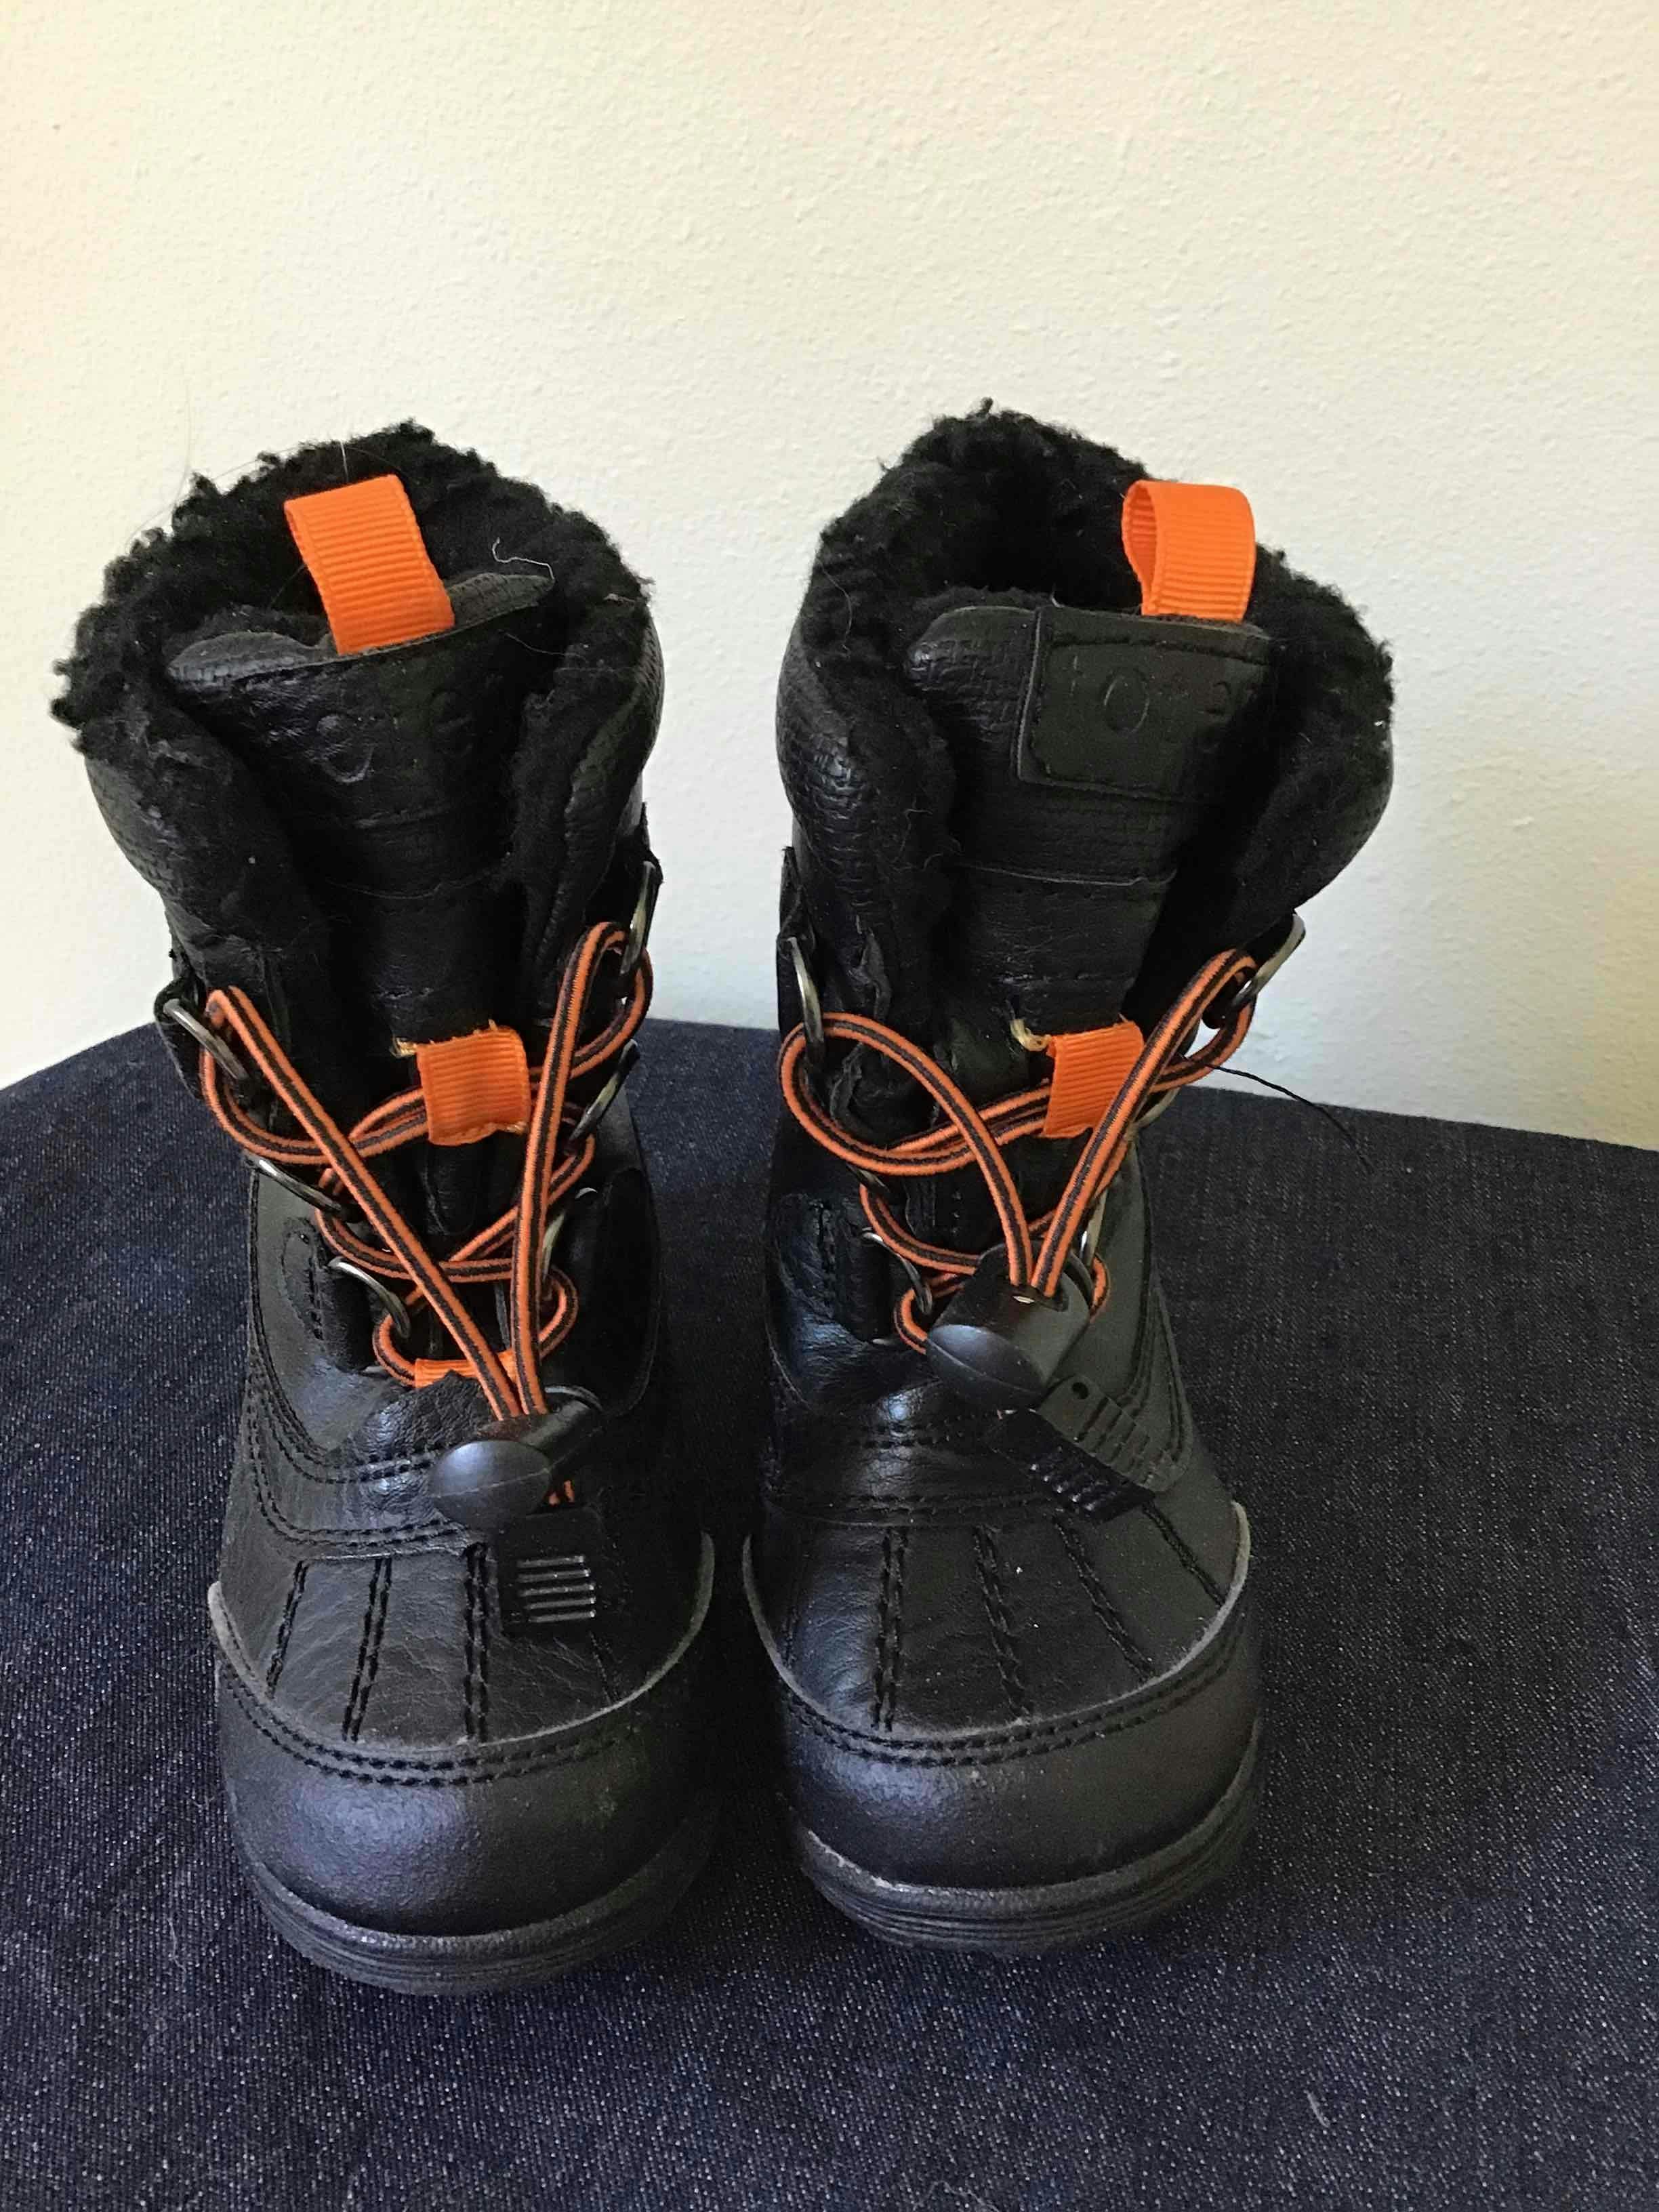 Totes Snow Boots - Toddlers 7